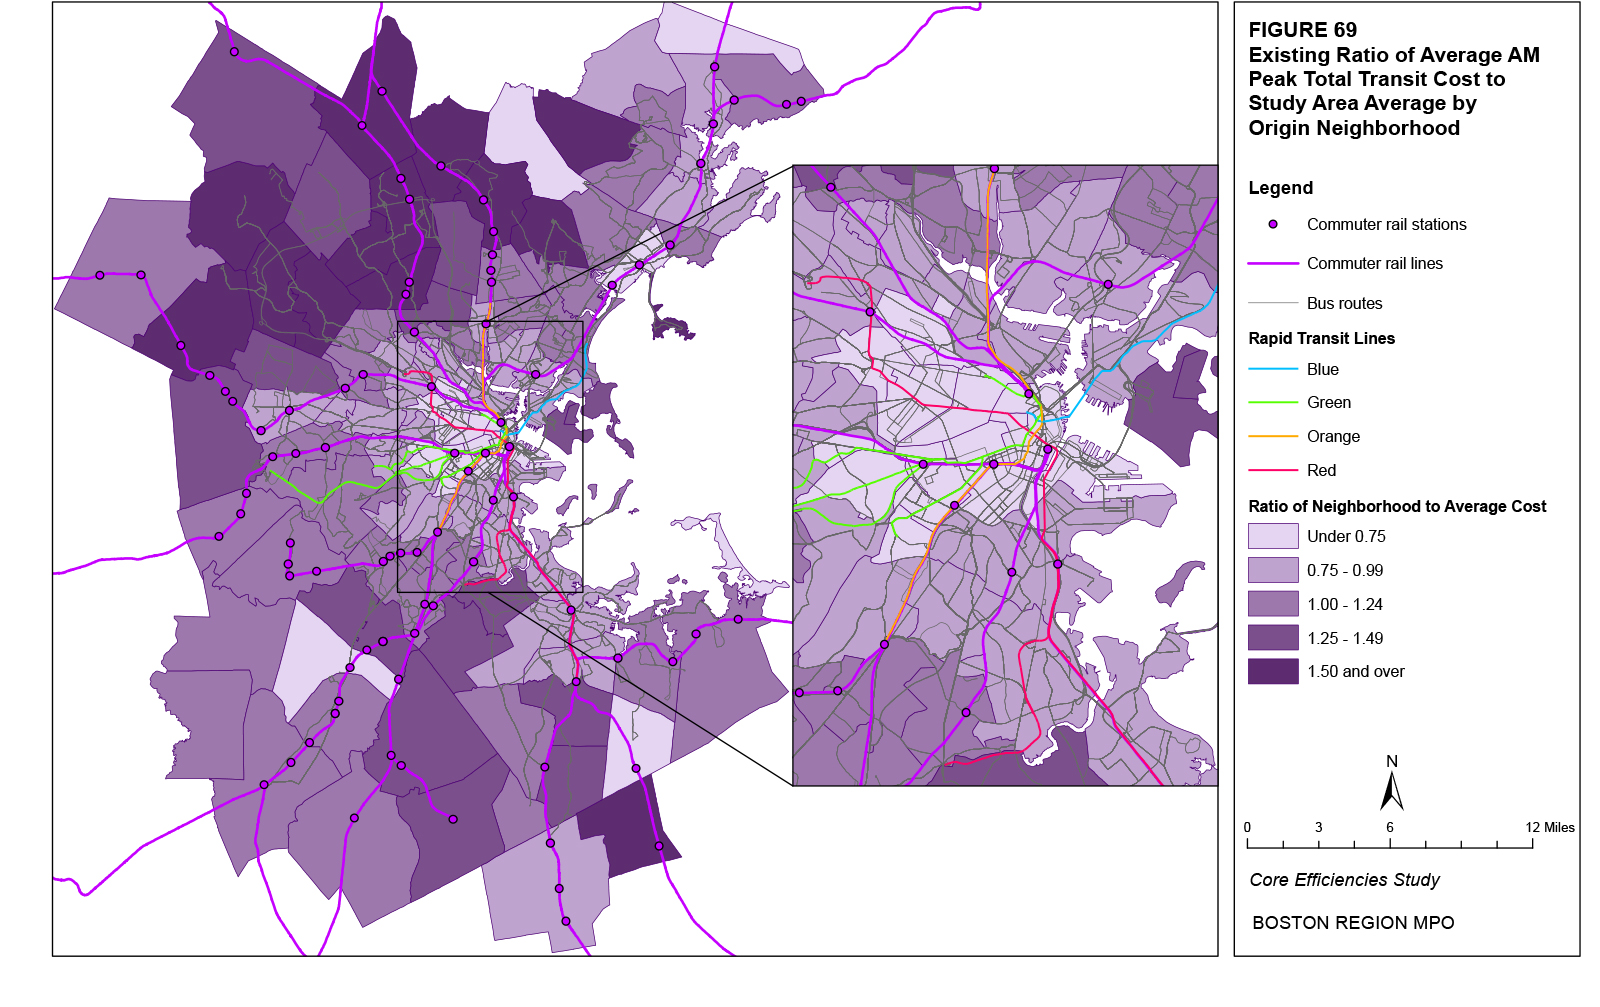 This map shows the existing average AM peak total transit costs for origin trips by neighborhood